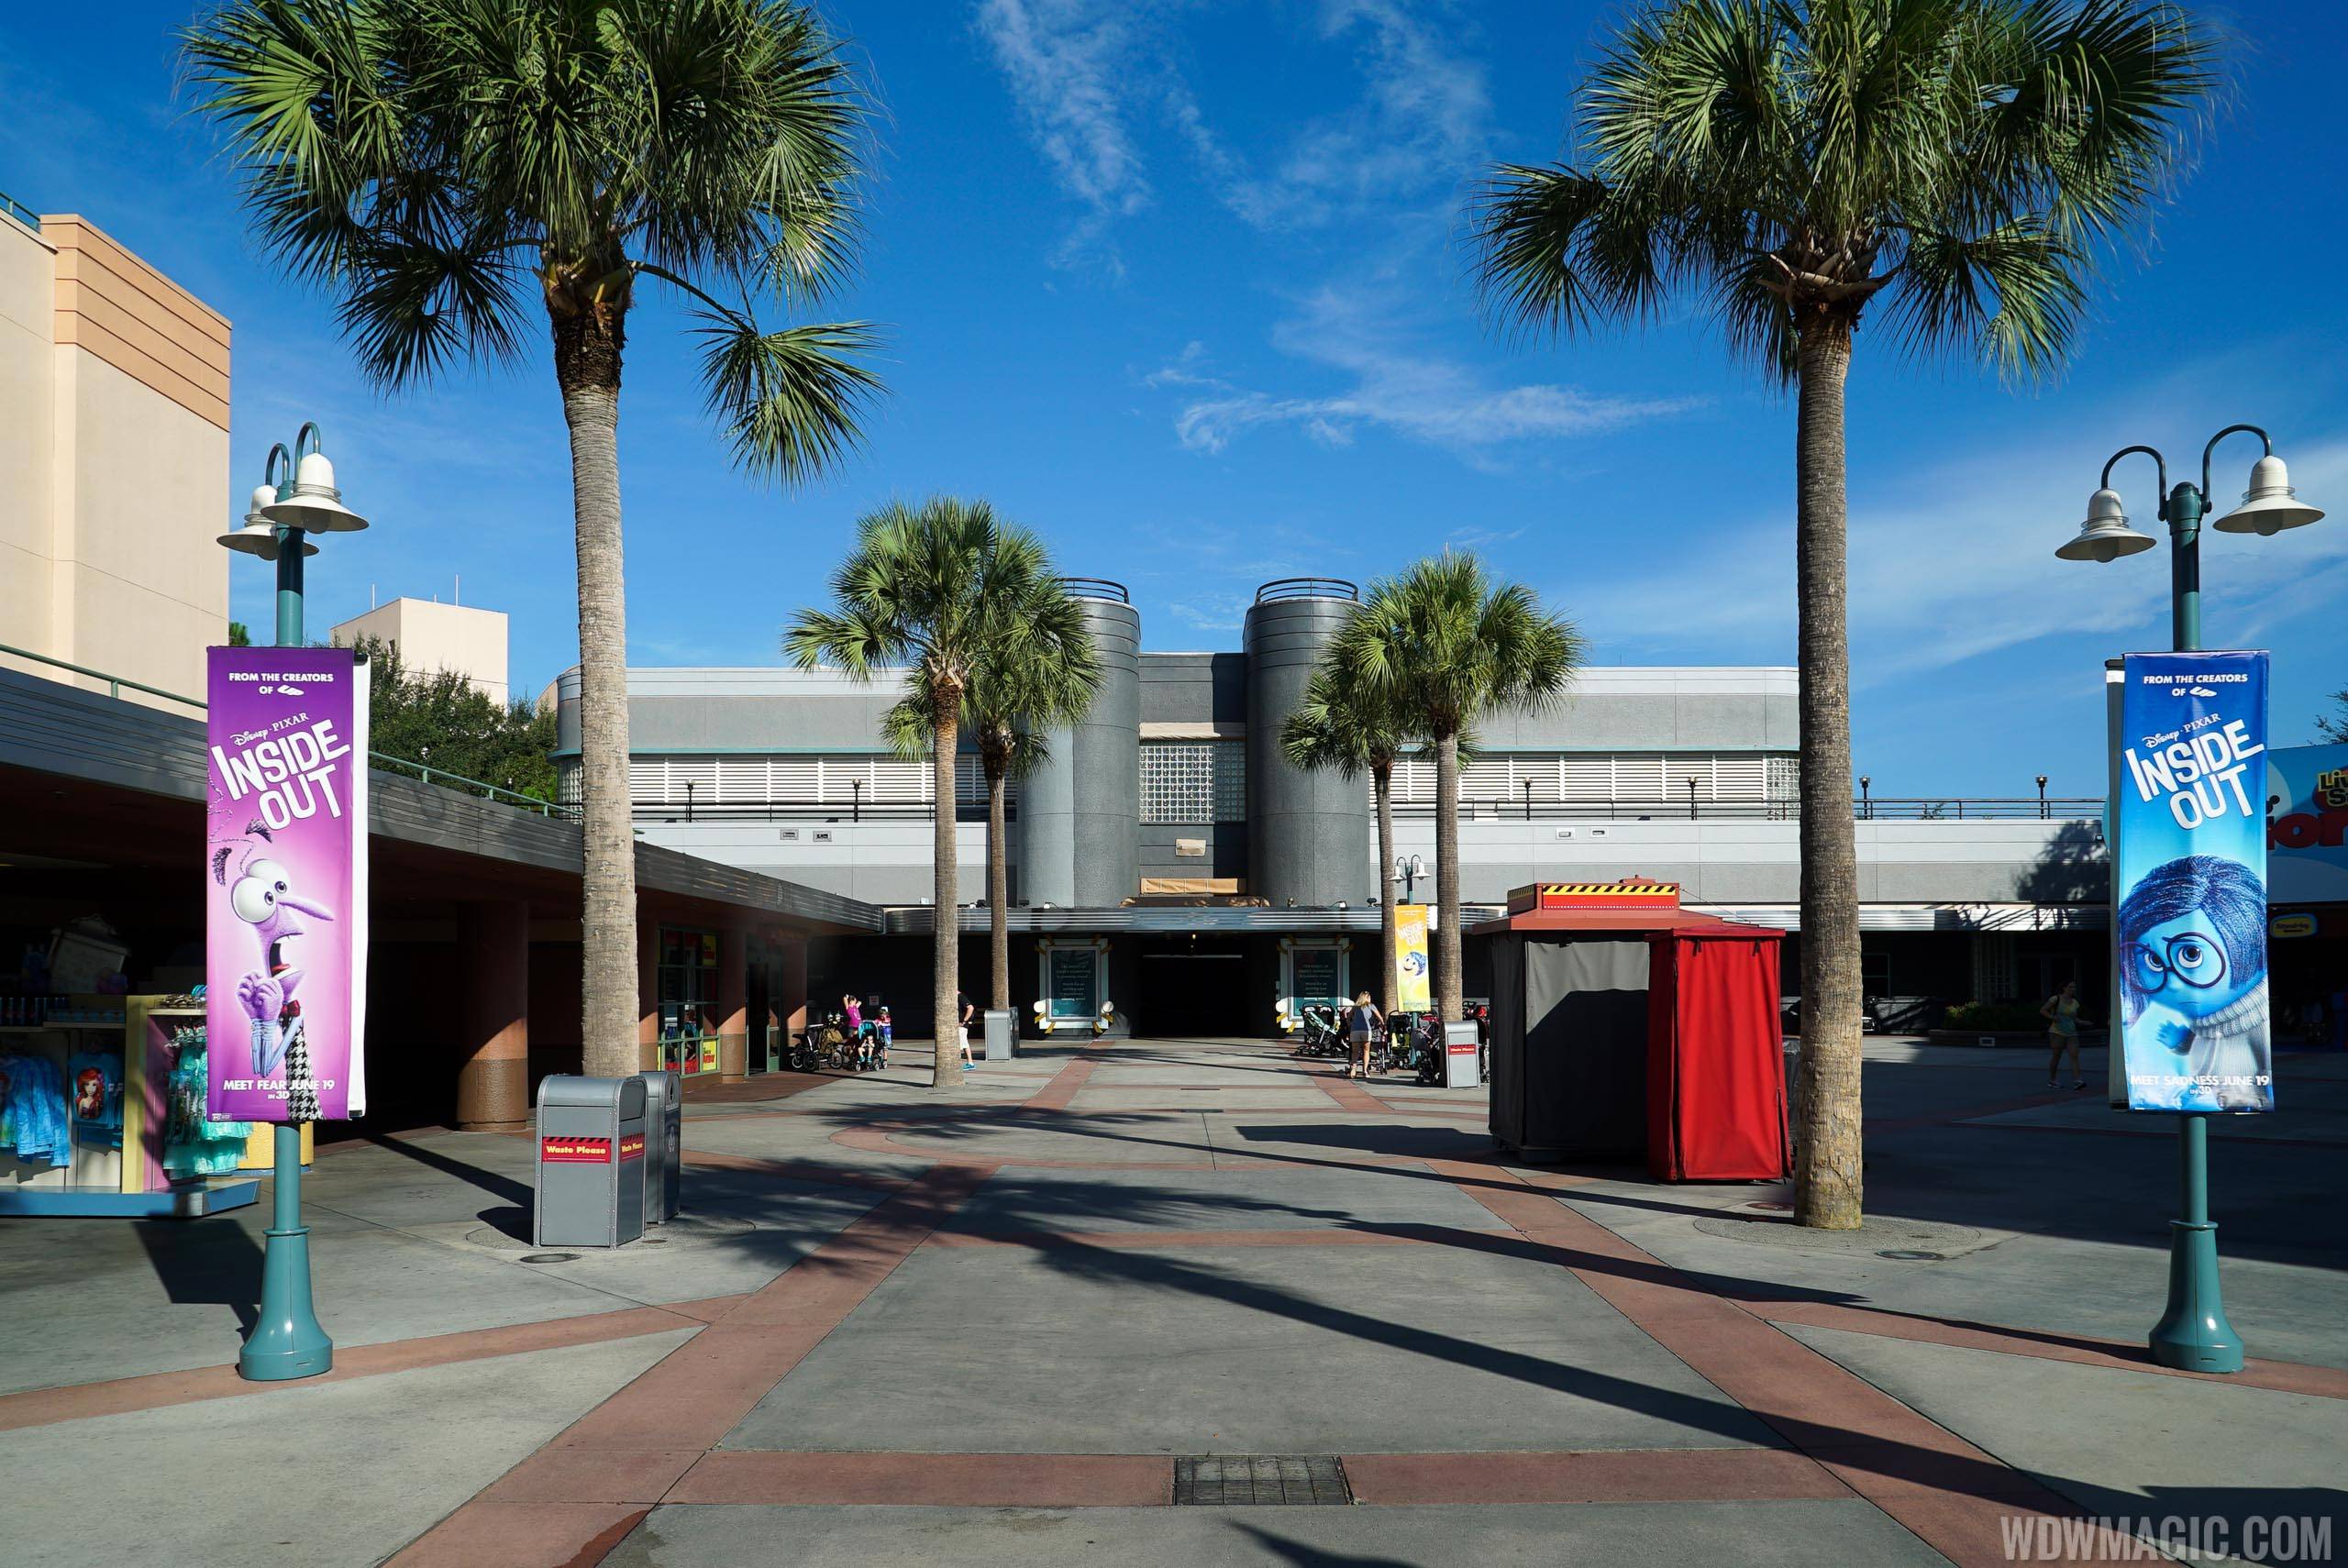 PHOTOS - The former Magic of Disney Animation building goes gray ahead of Star Wars Launch Bay